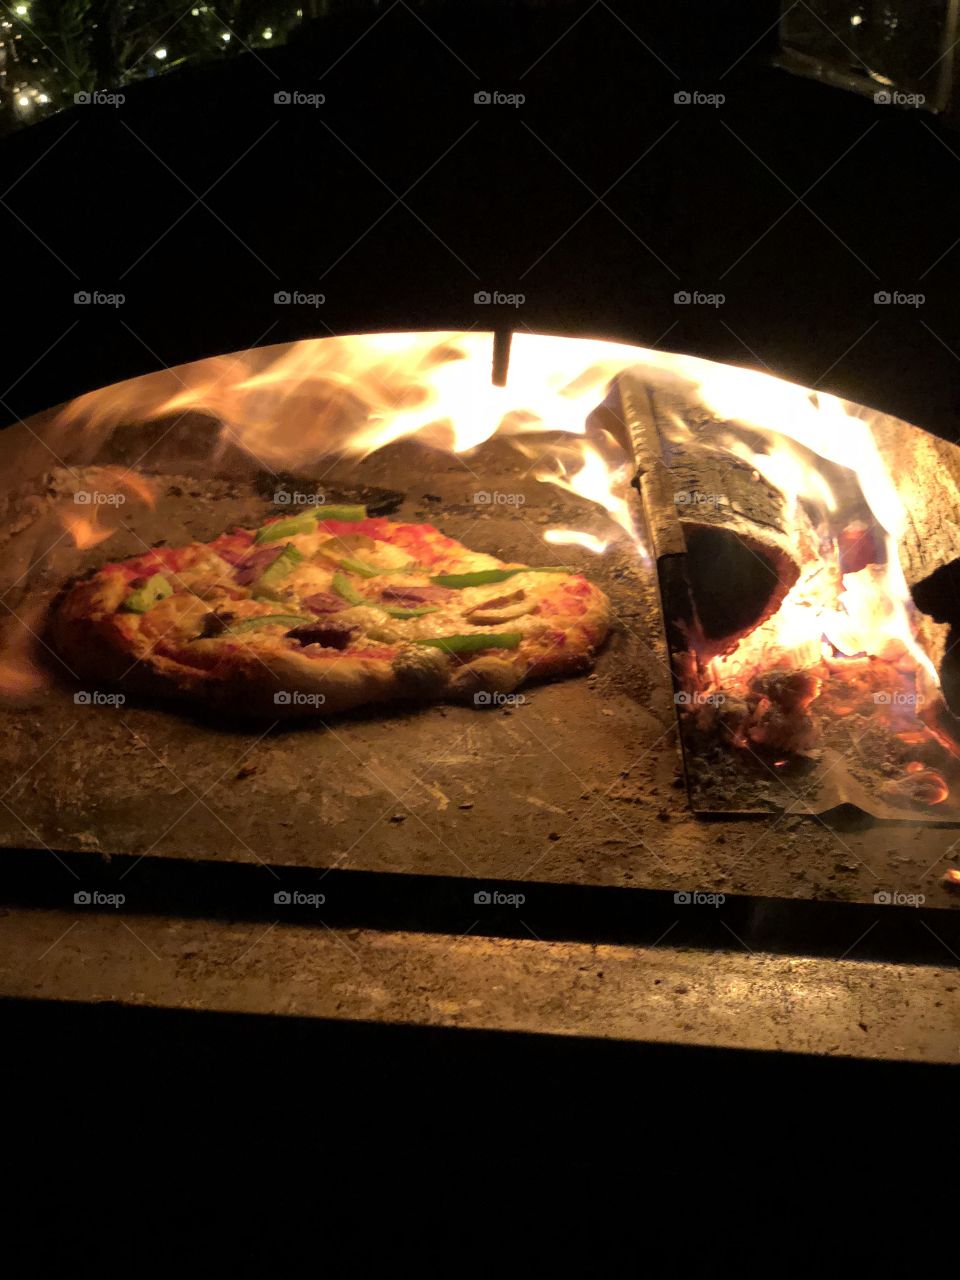 Traditional pizza in the Making, 400+ degrees, just like it should be